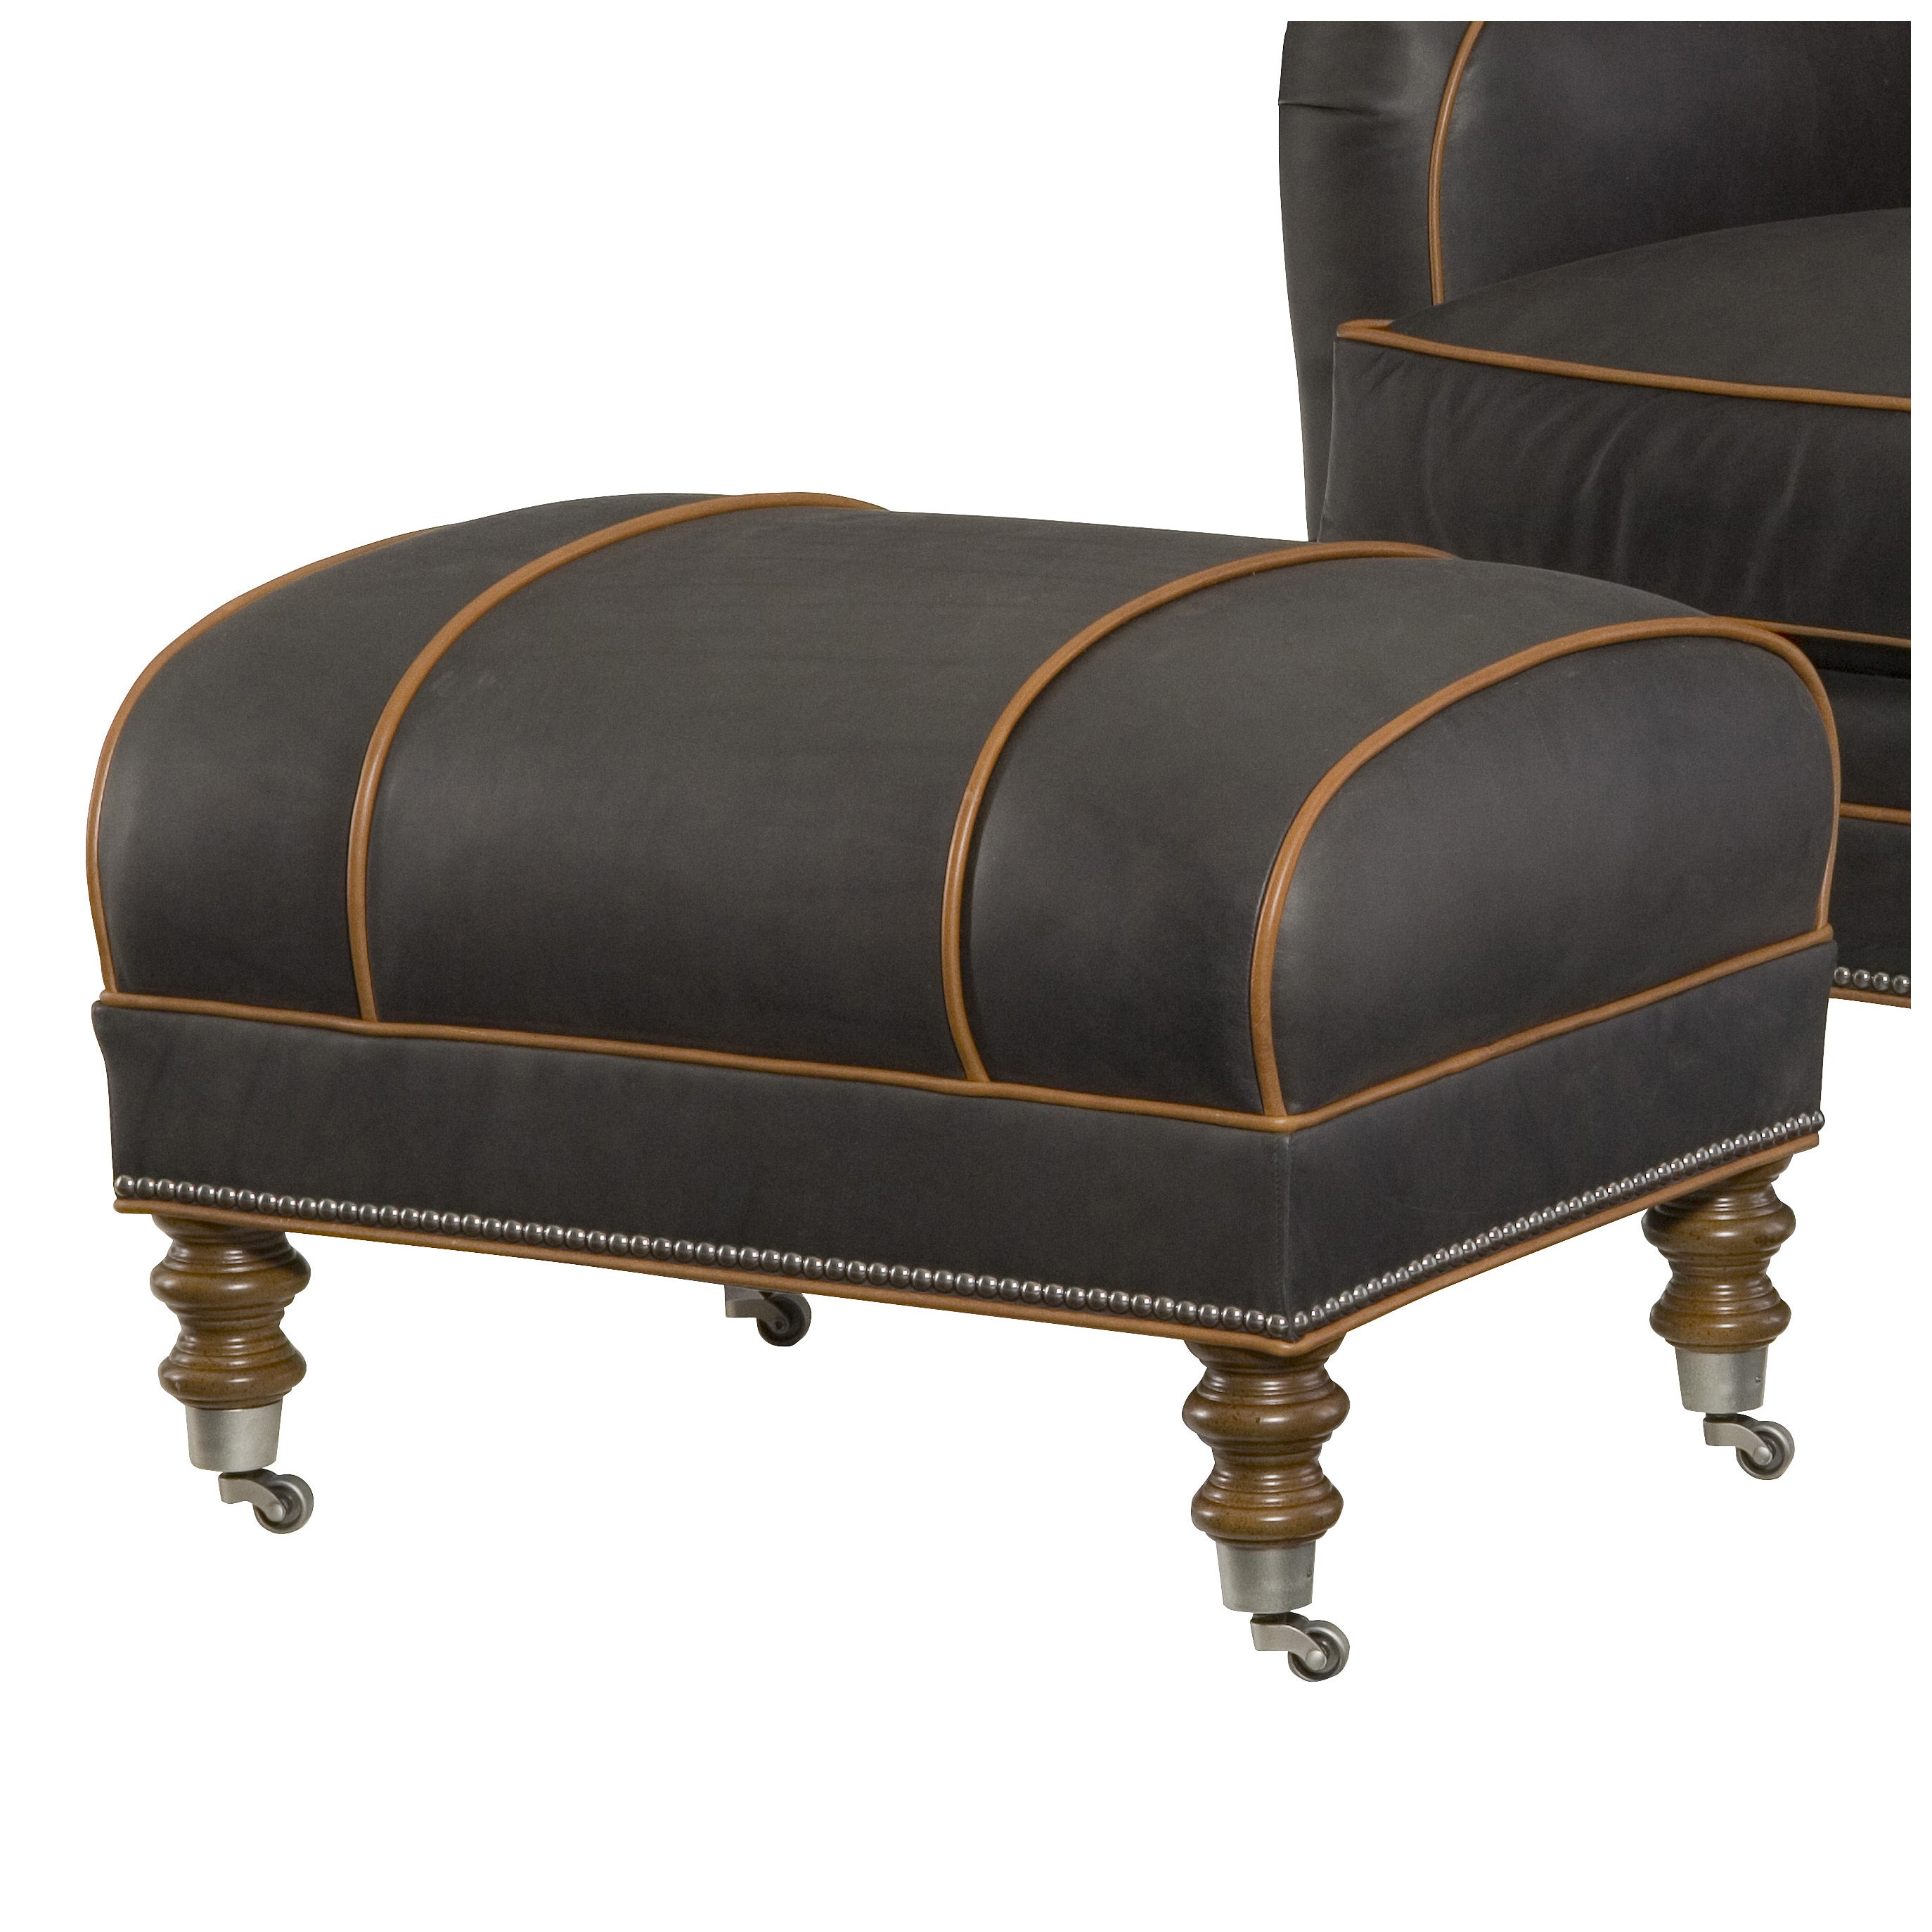 Hartwell Leather Ottoman by Wesley Hall, shown in Crockett Chimney leather